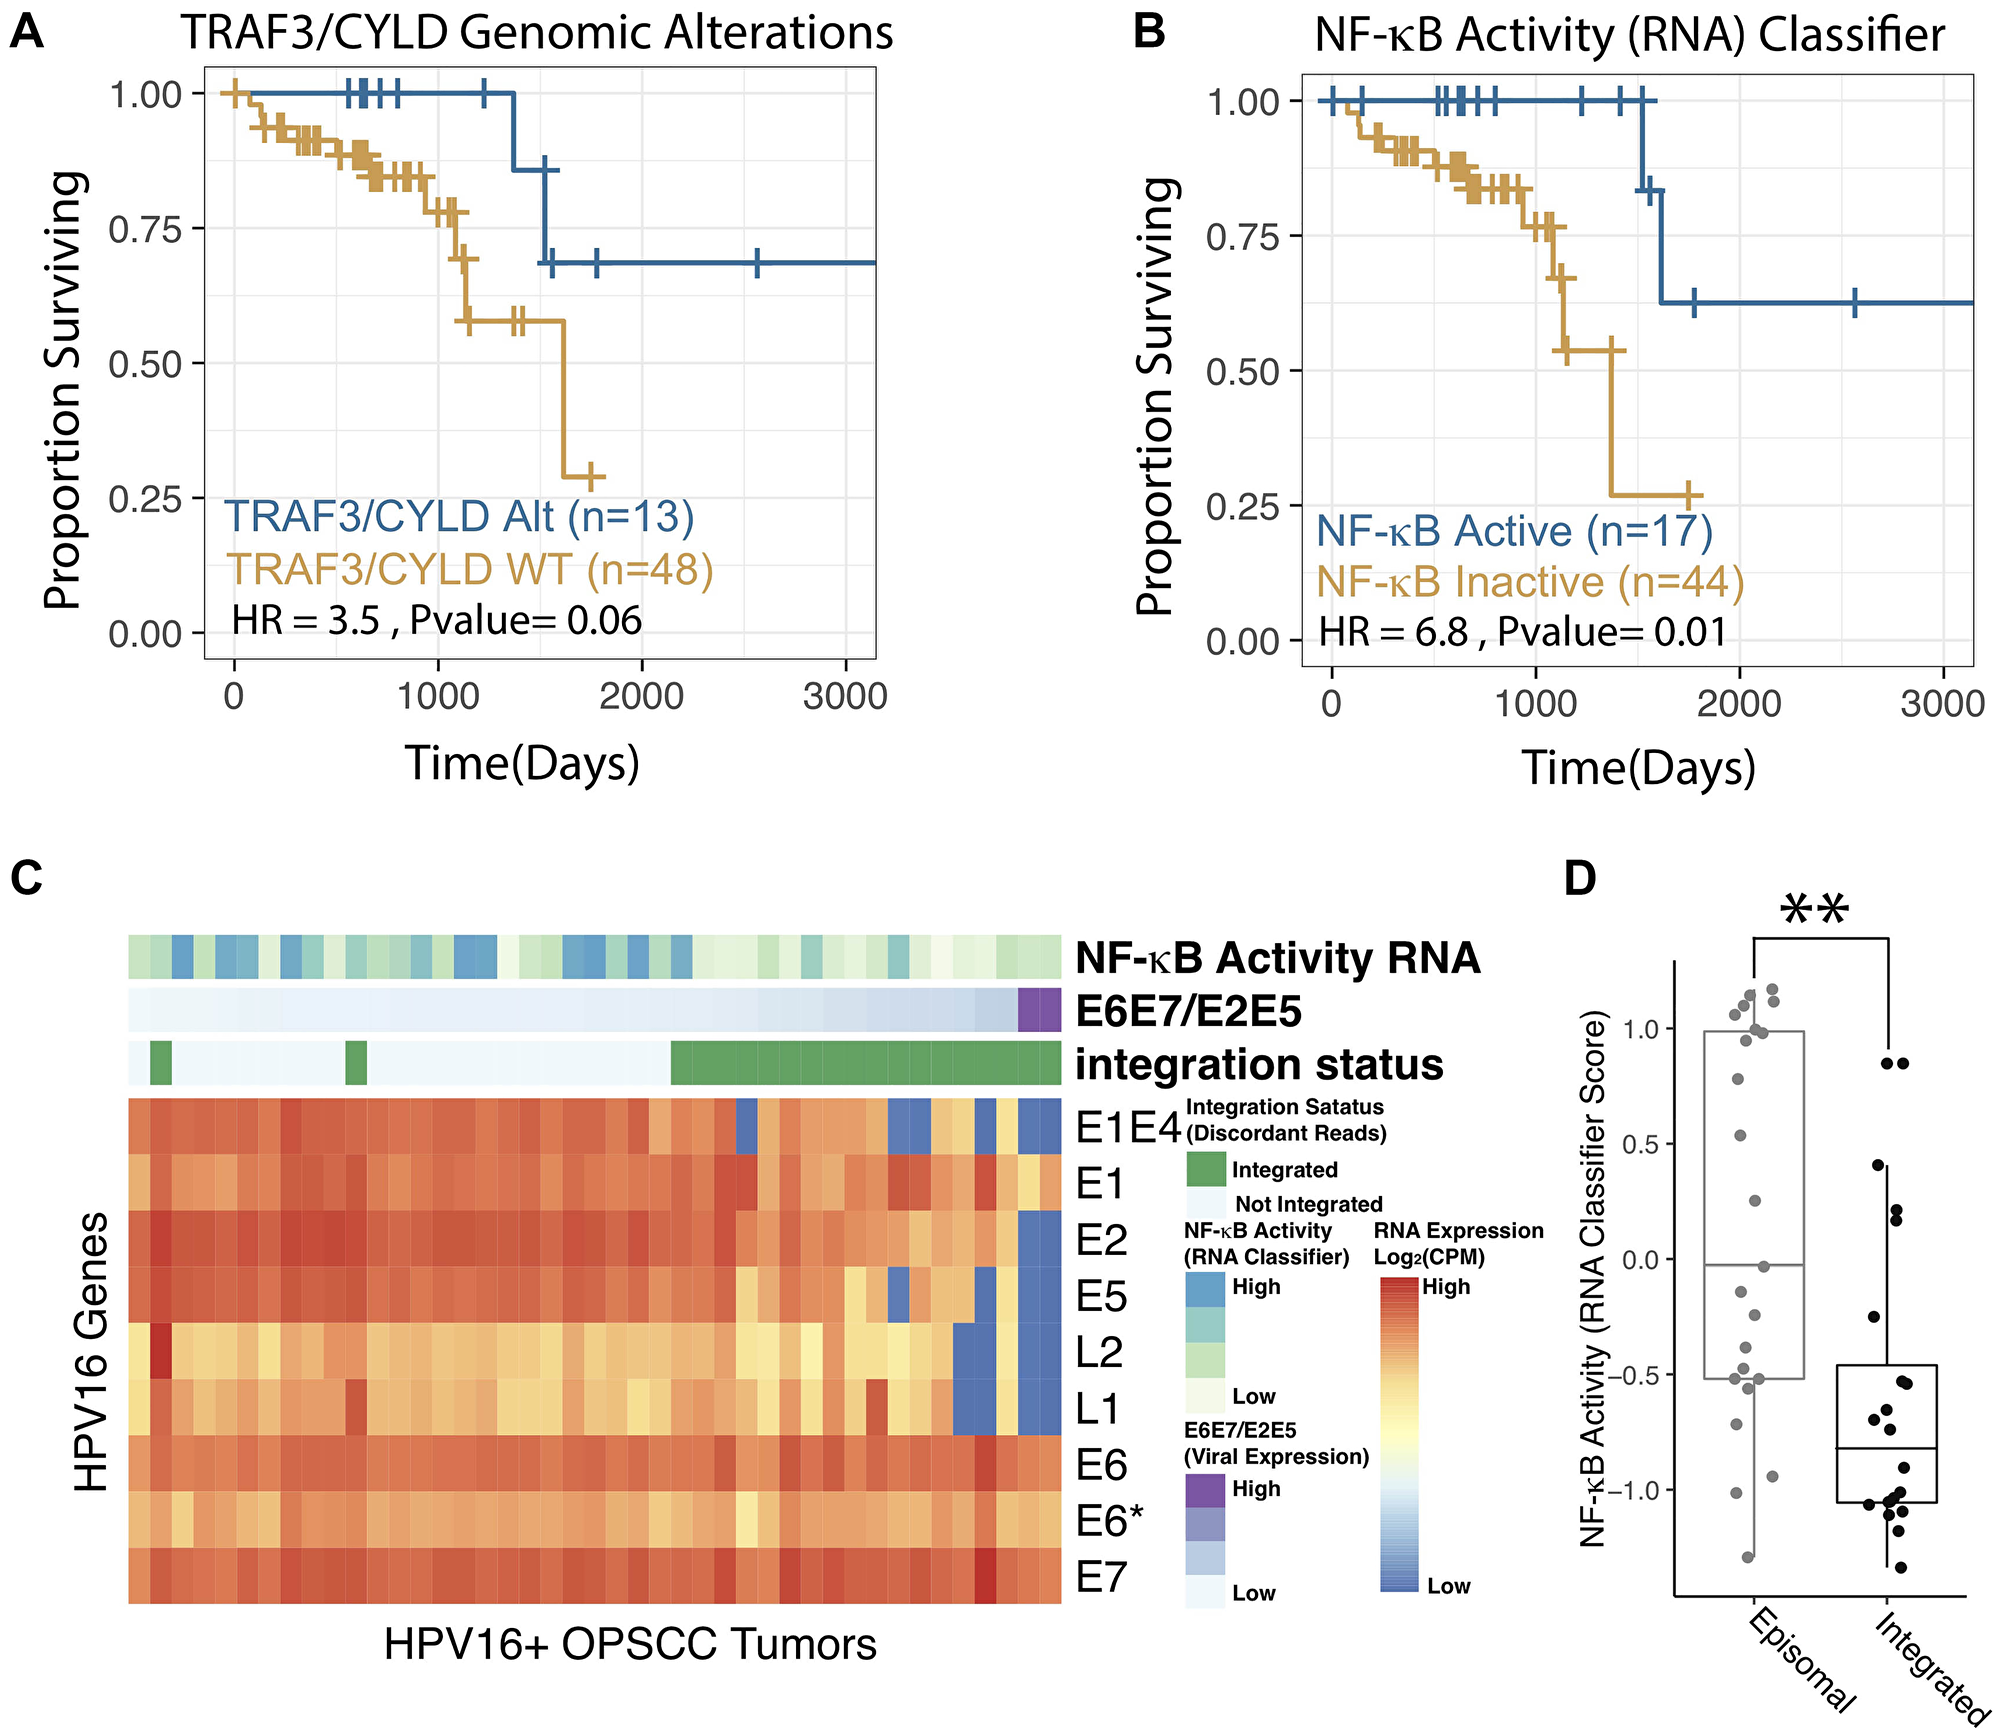 NF-κB activity classifier correlates with patient outcomes and viral integration status.